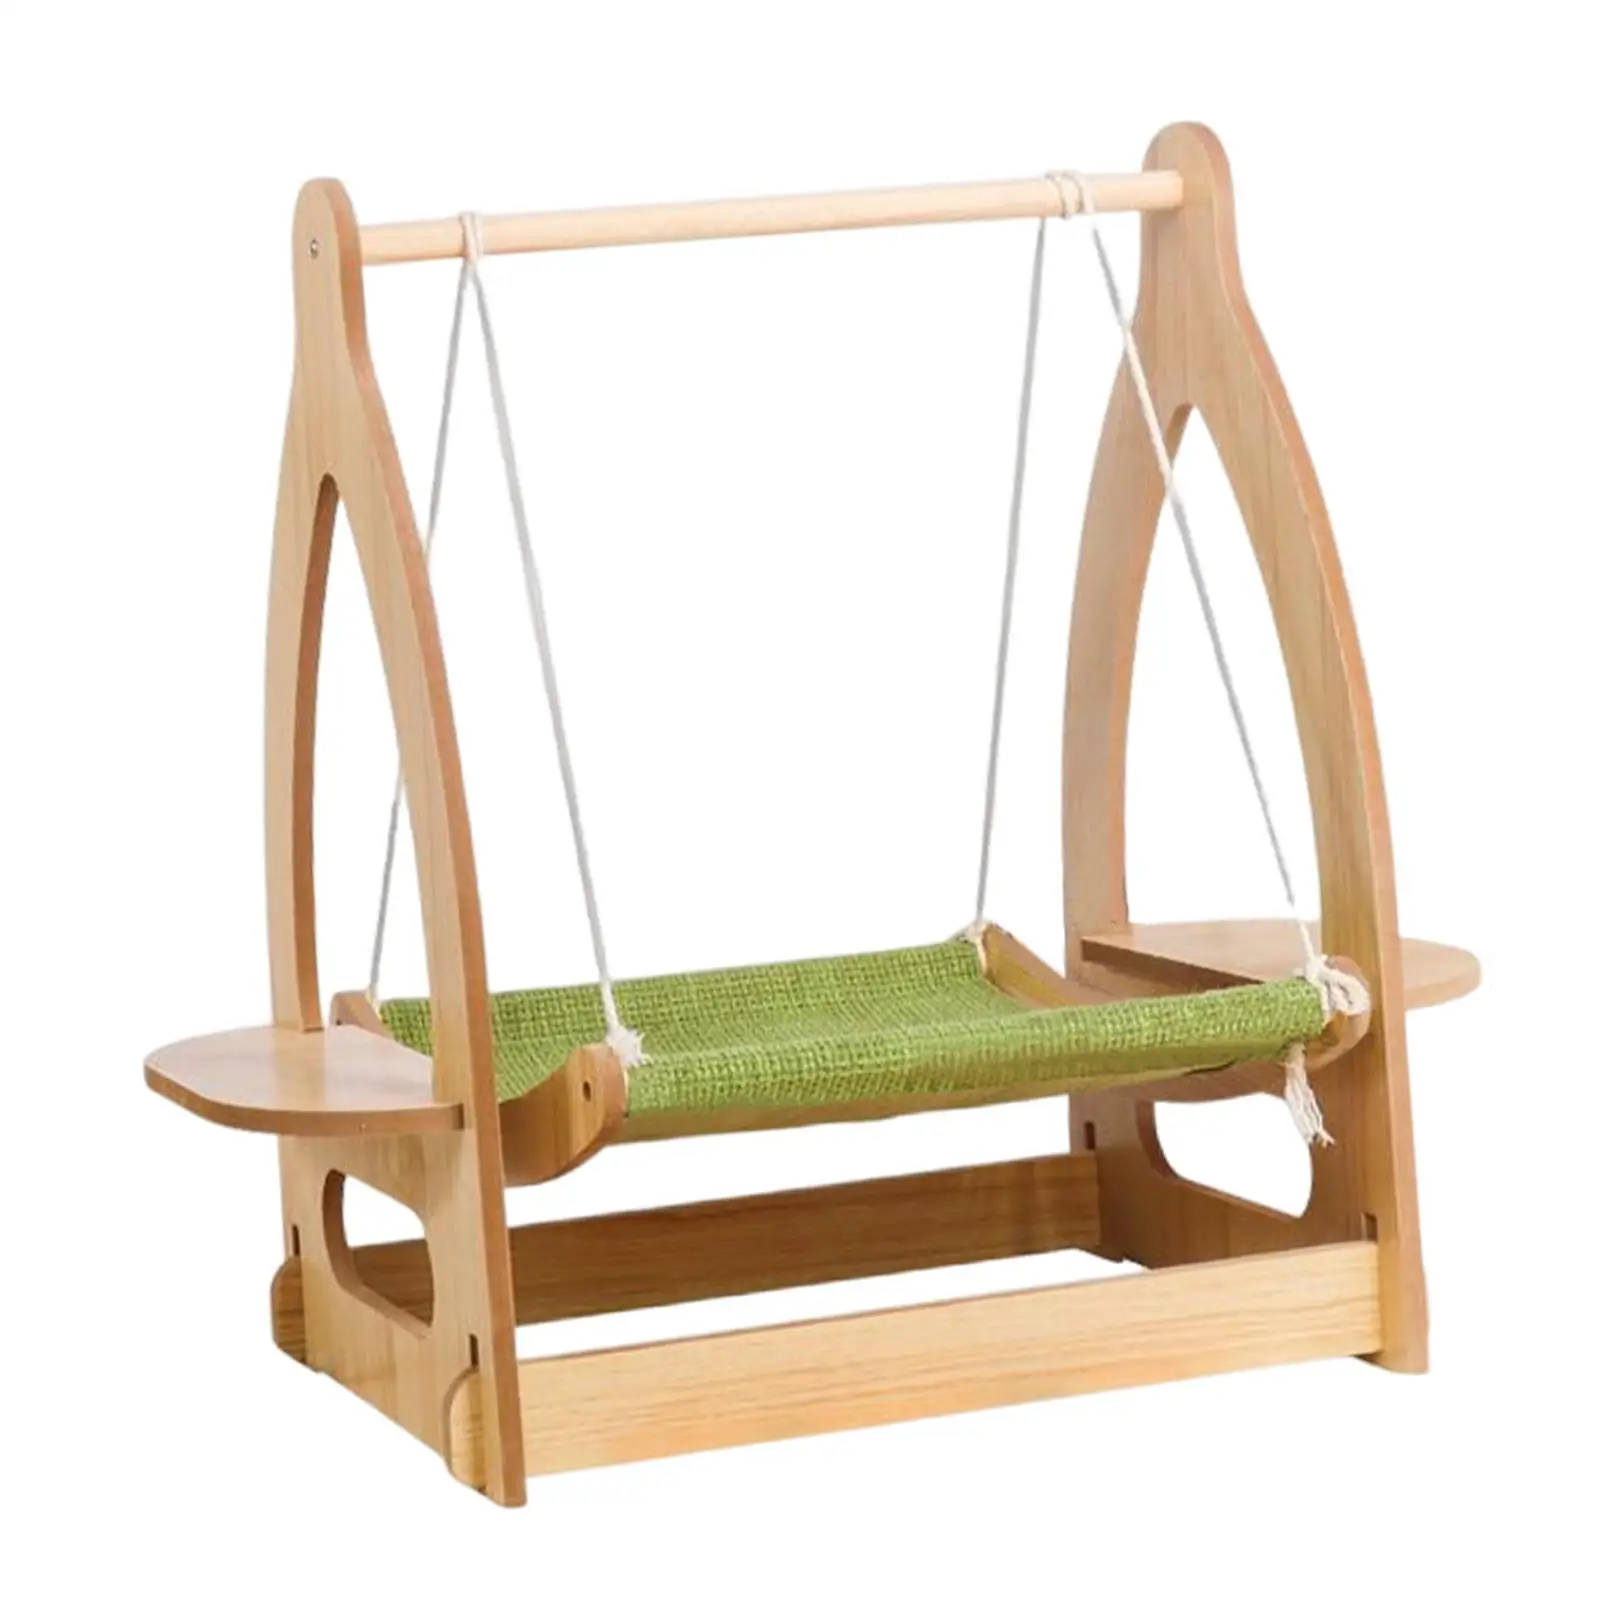 Cat Hammock, Pet Hanging Swing, Durable Frame, Wooden Lounger, Raised Pet Bed, Toy